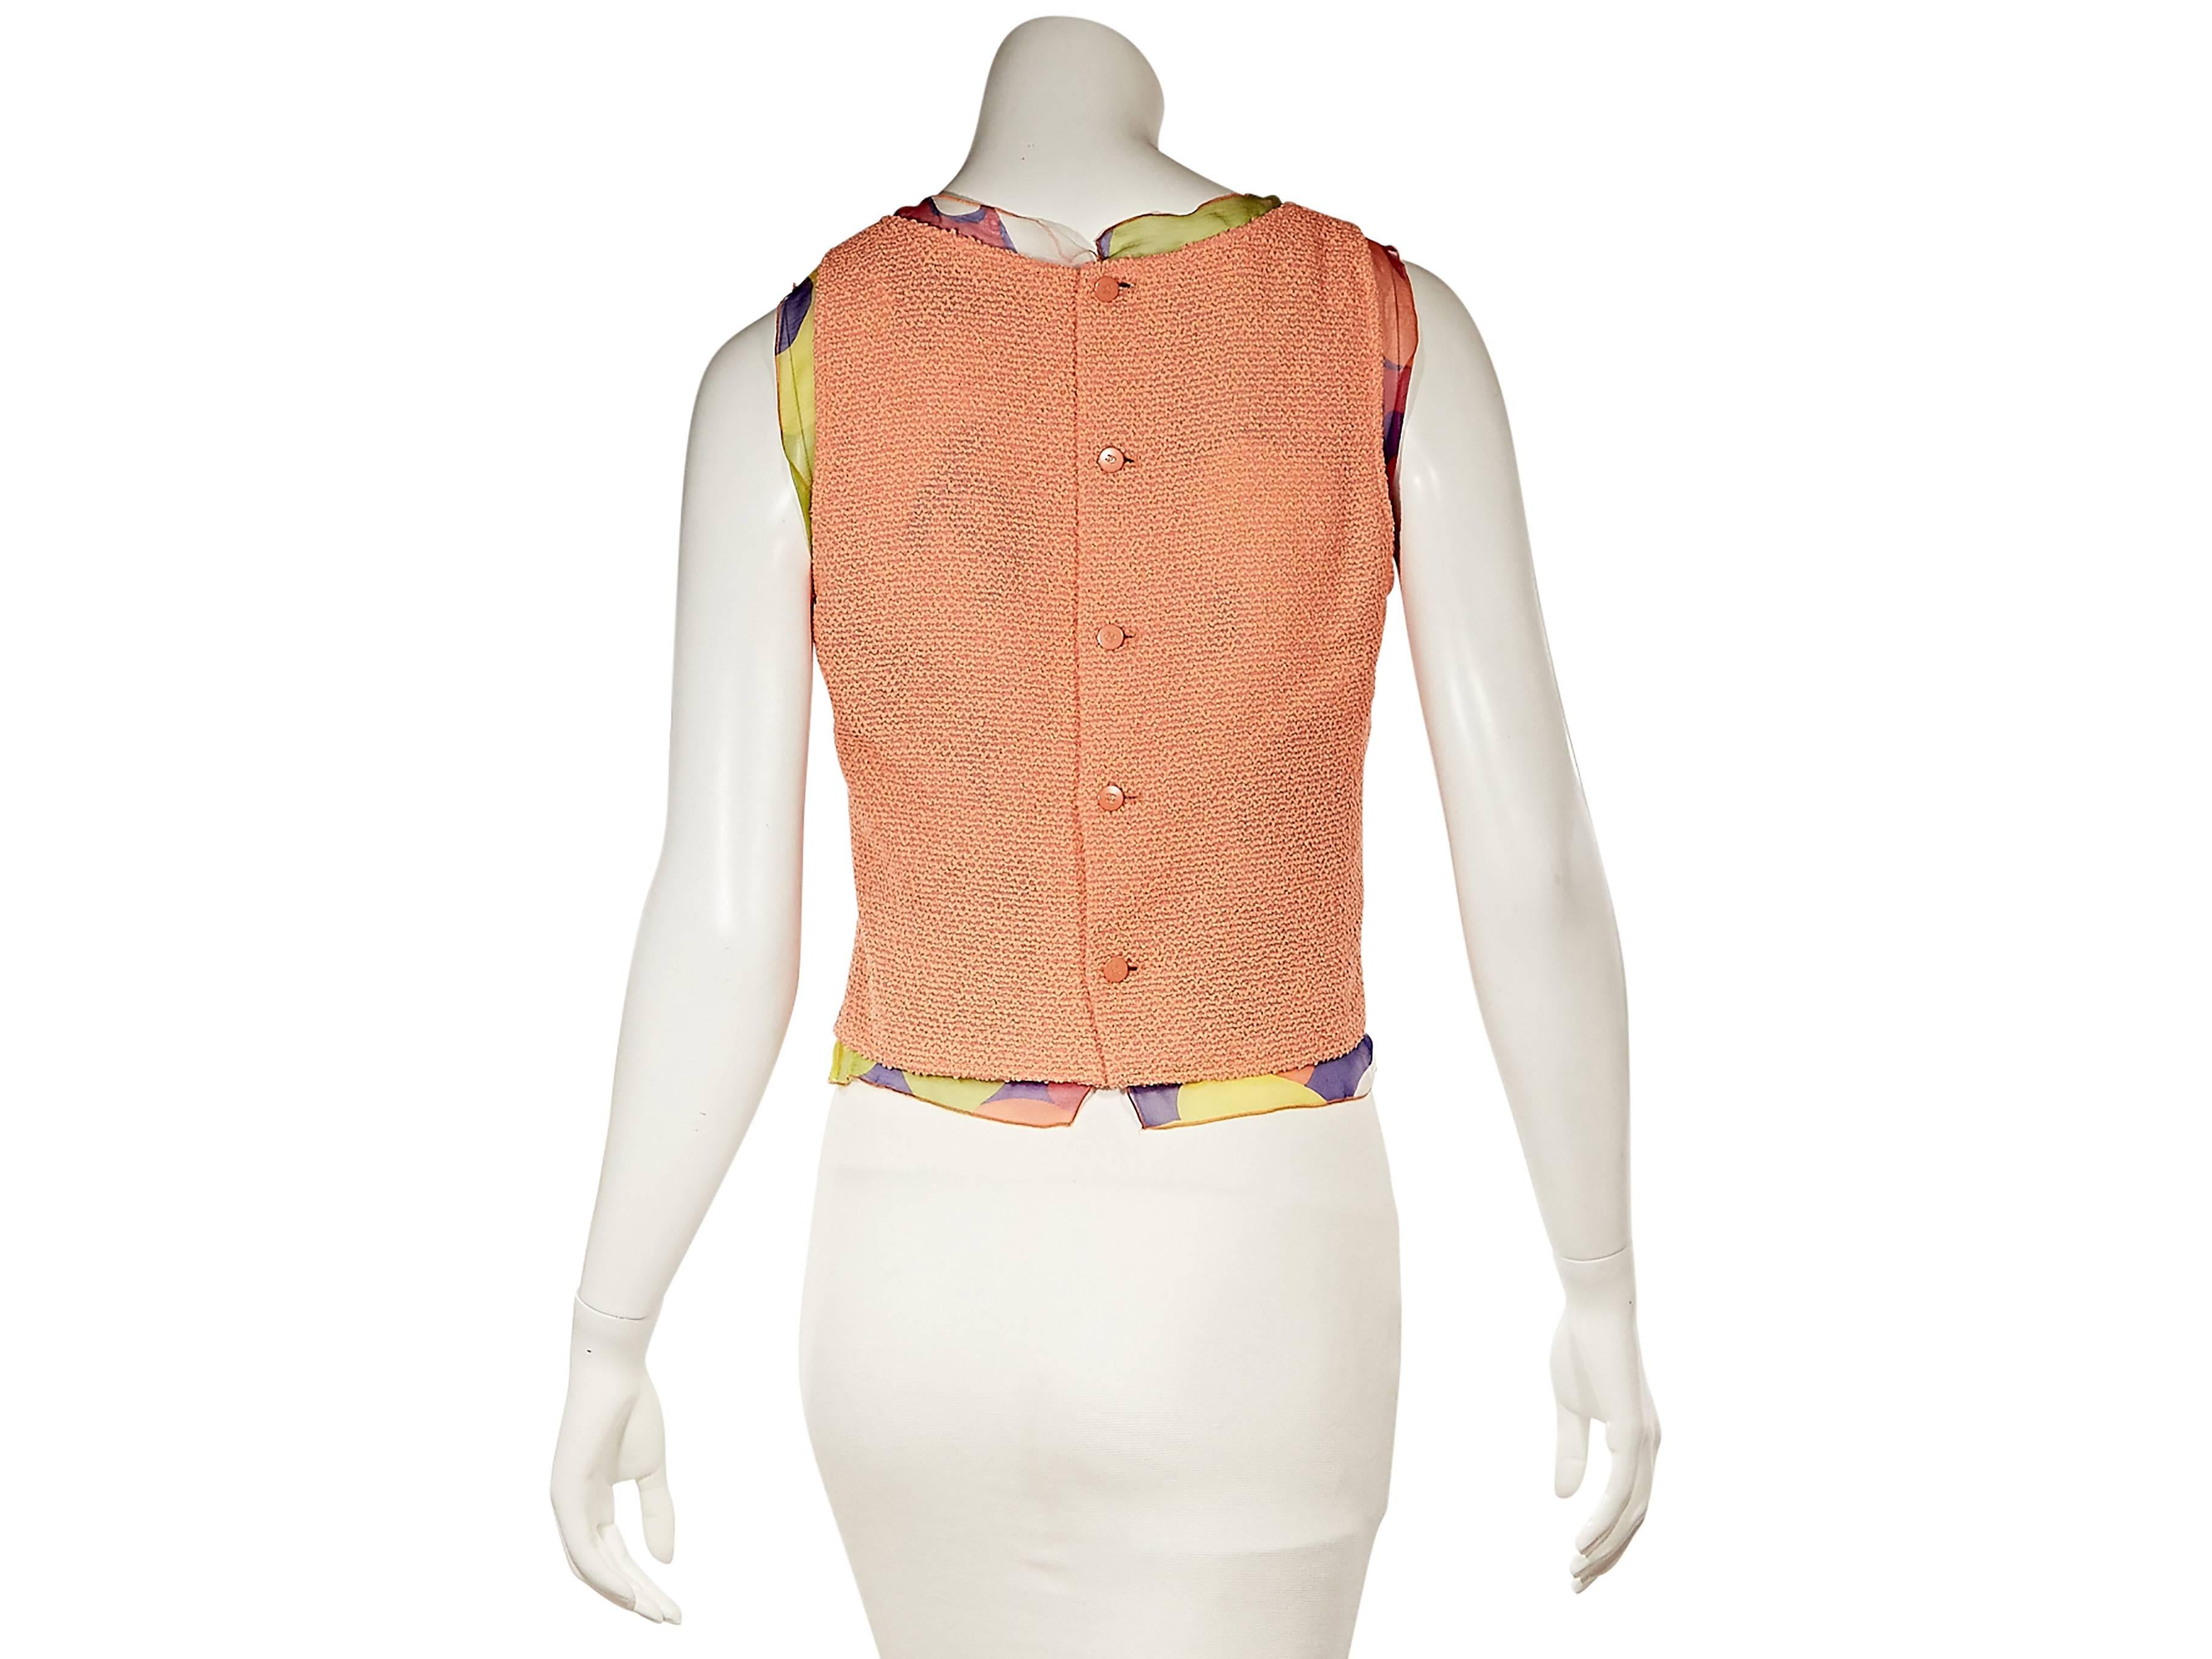 Product details:  Orange shell top with printed silk trim by Chanel.  Scoopneck. Sleeveless.  Button back 
Condition: Excellent.  
